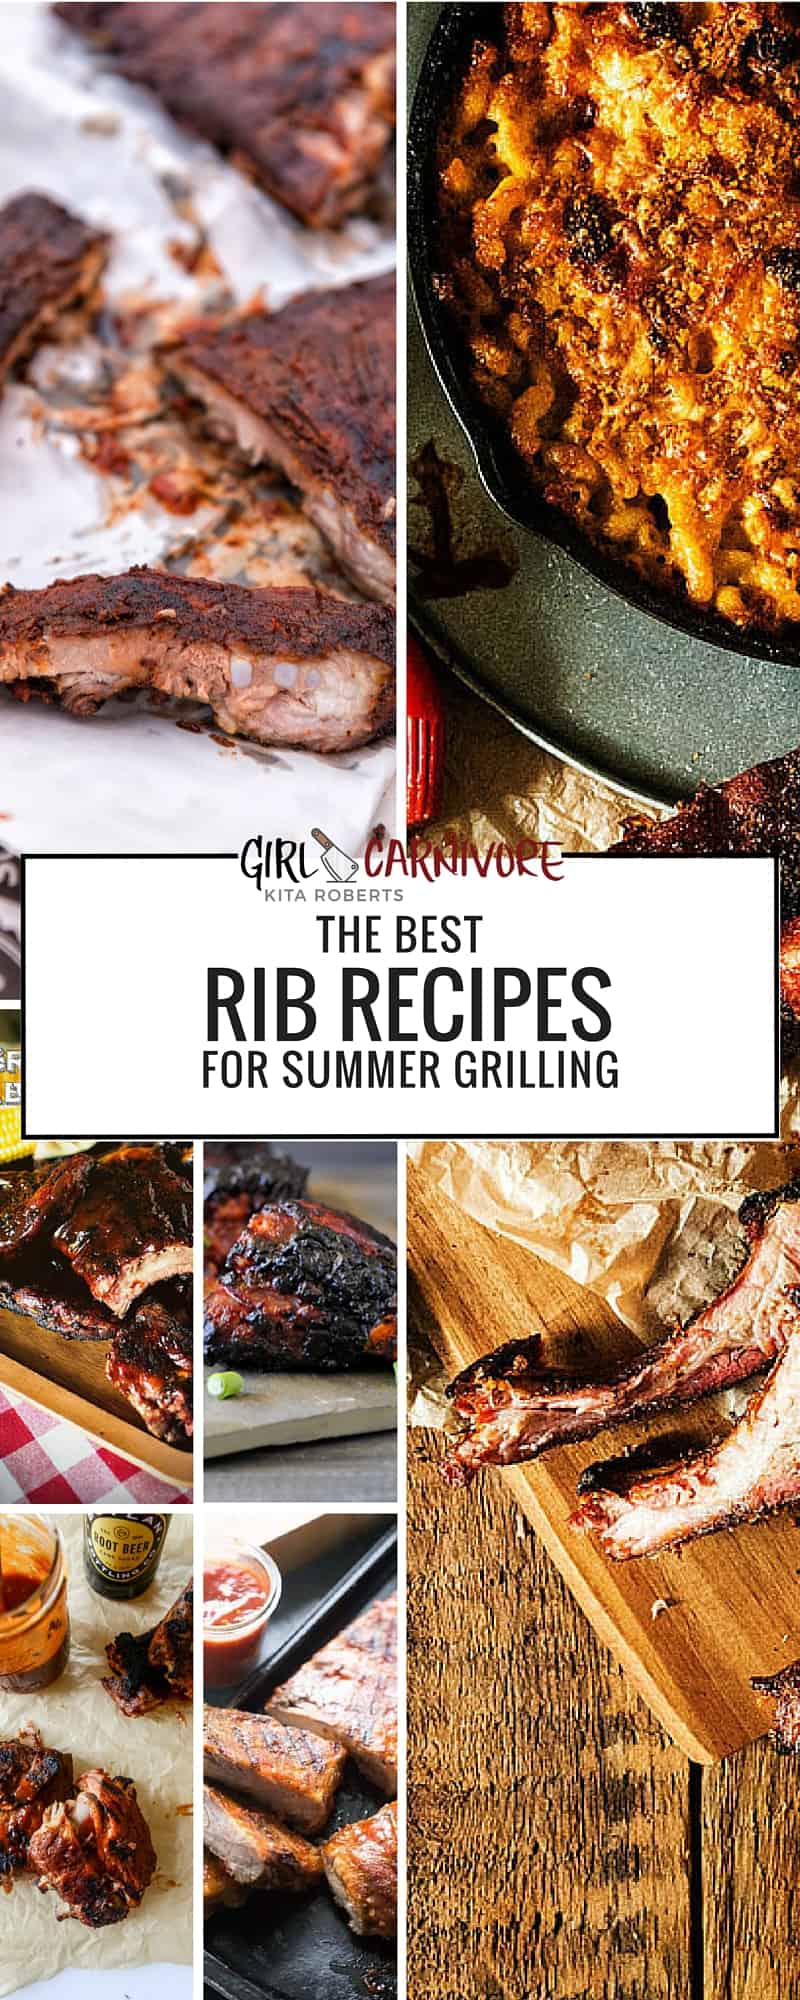 THE BEST RIB RECIPES FOR SUMMER GRILLING